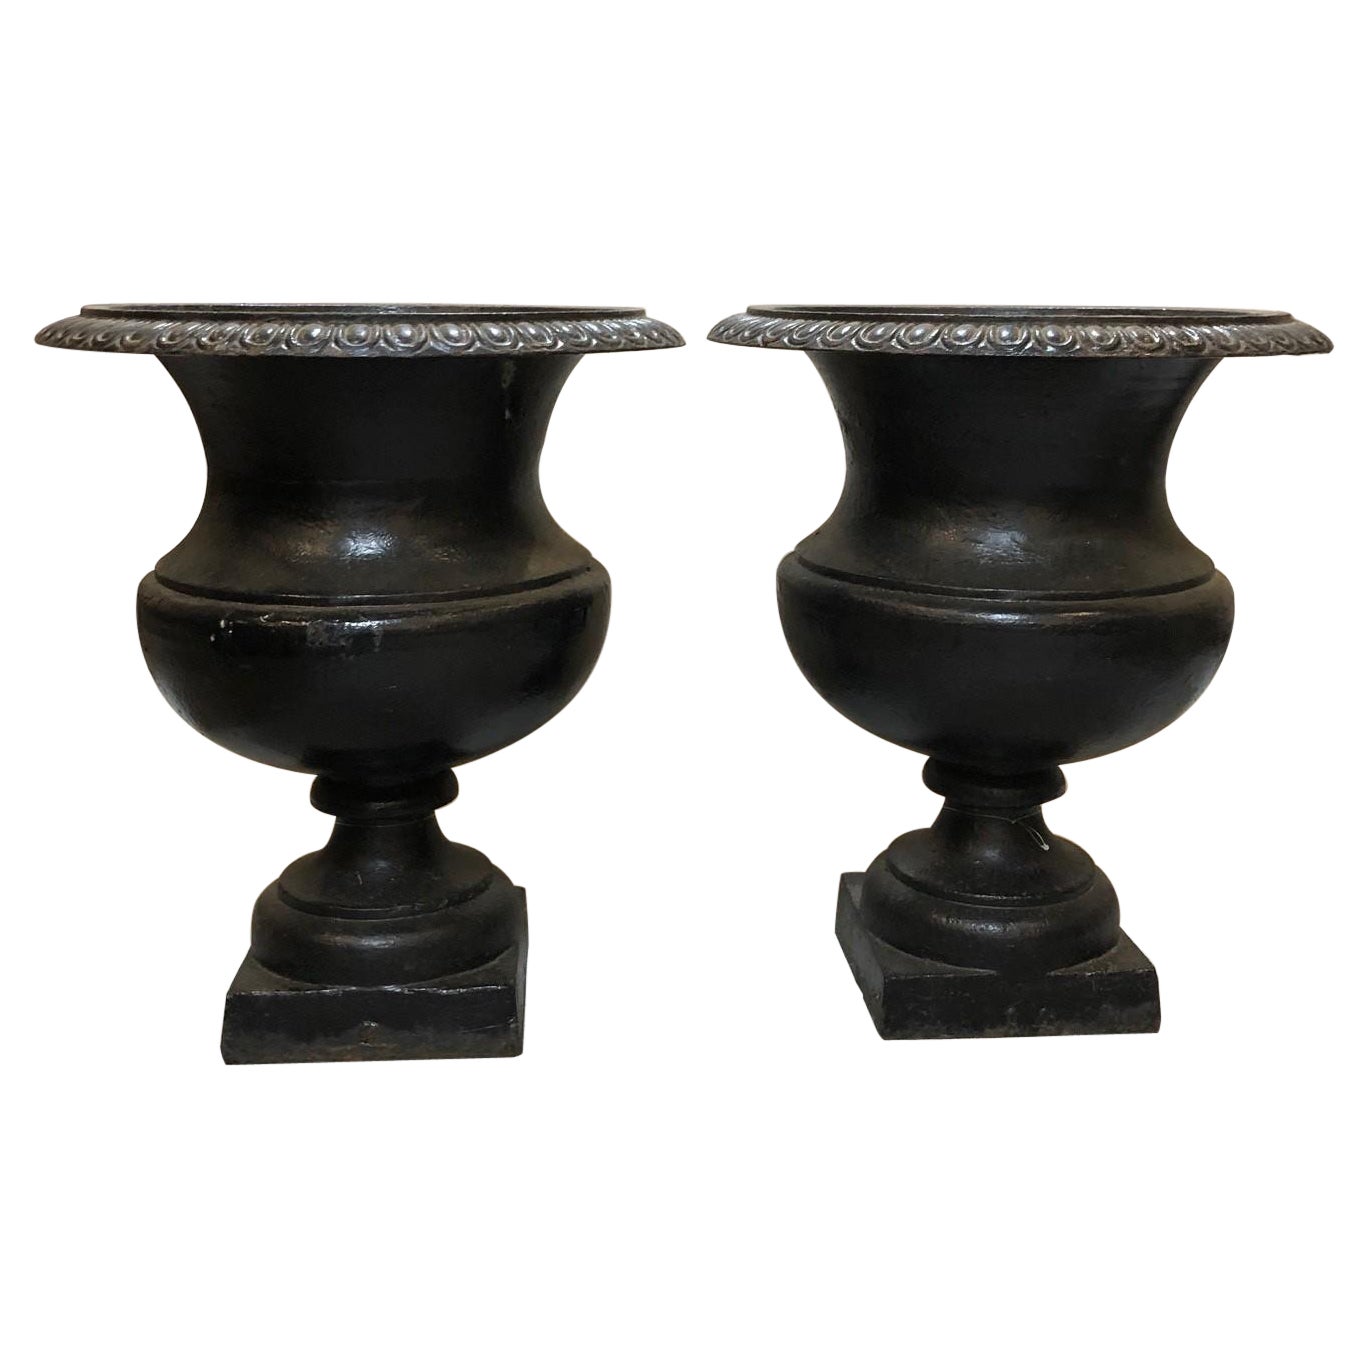 Pair of Iron Garden Urns with Black Finish